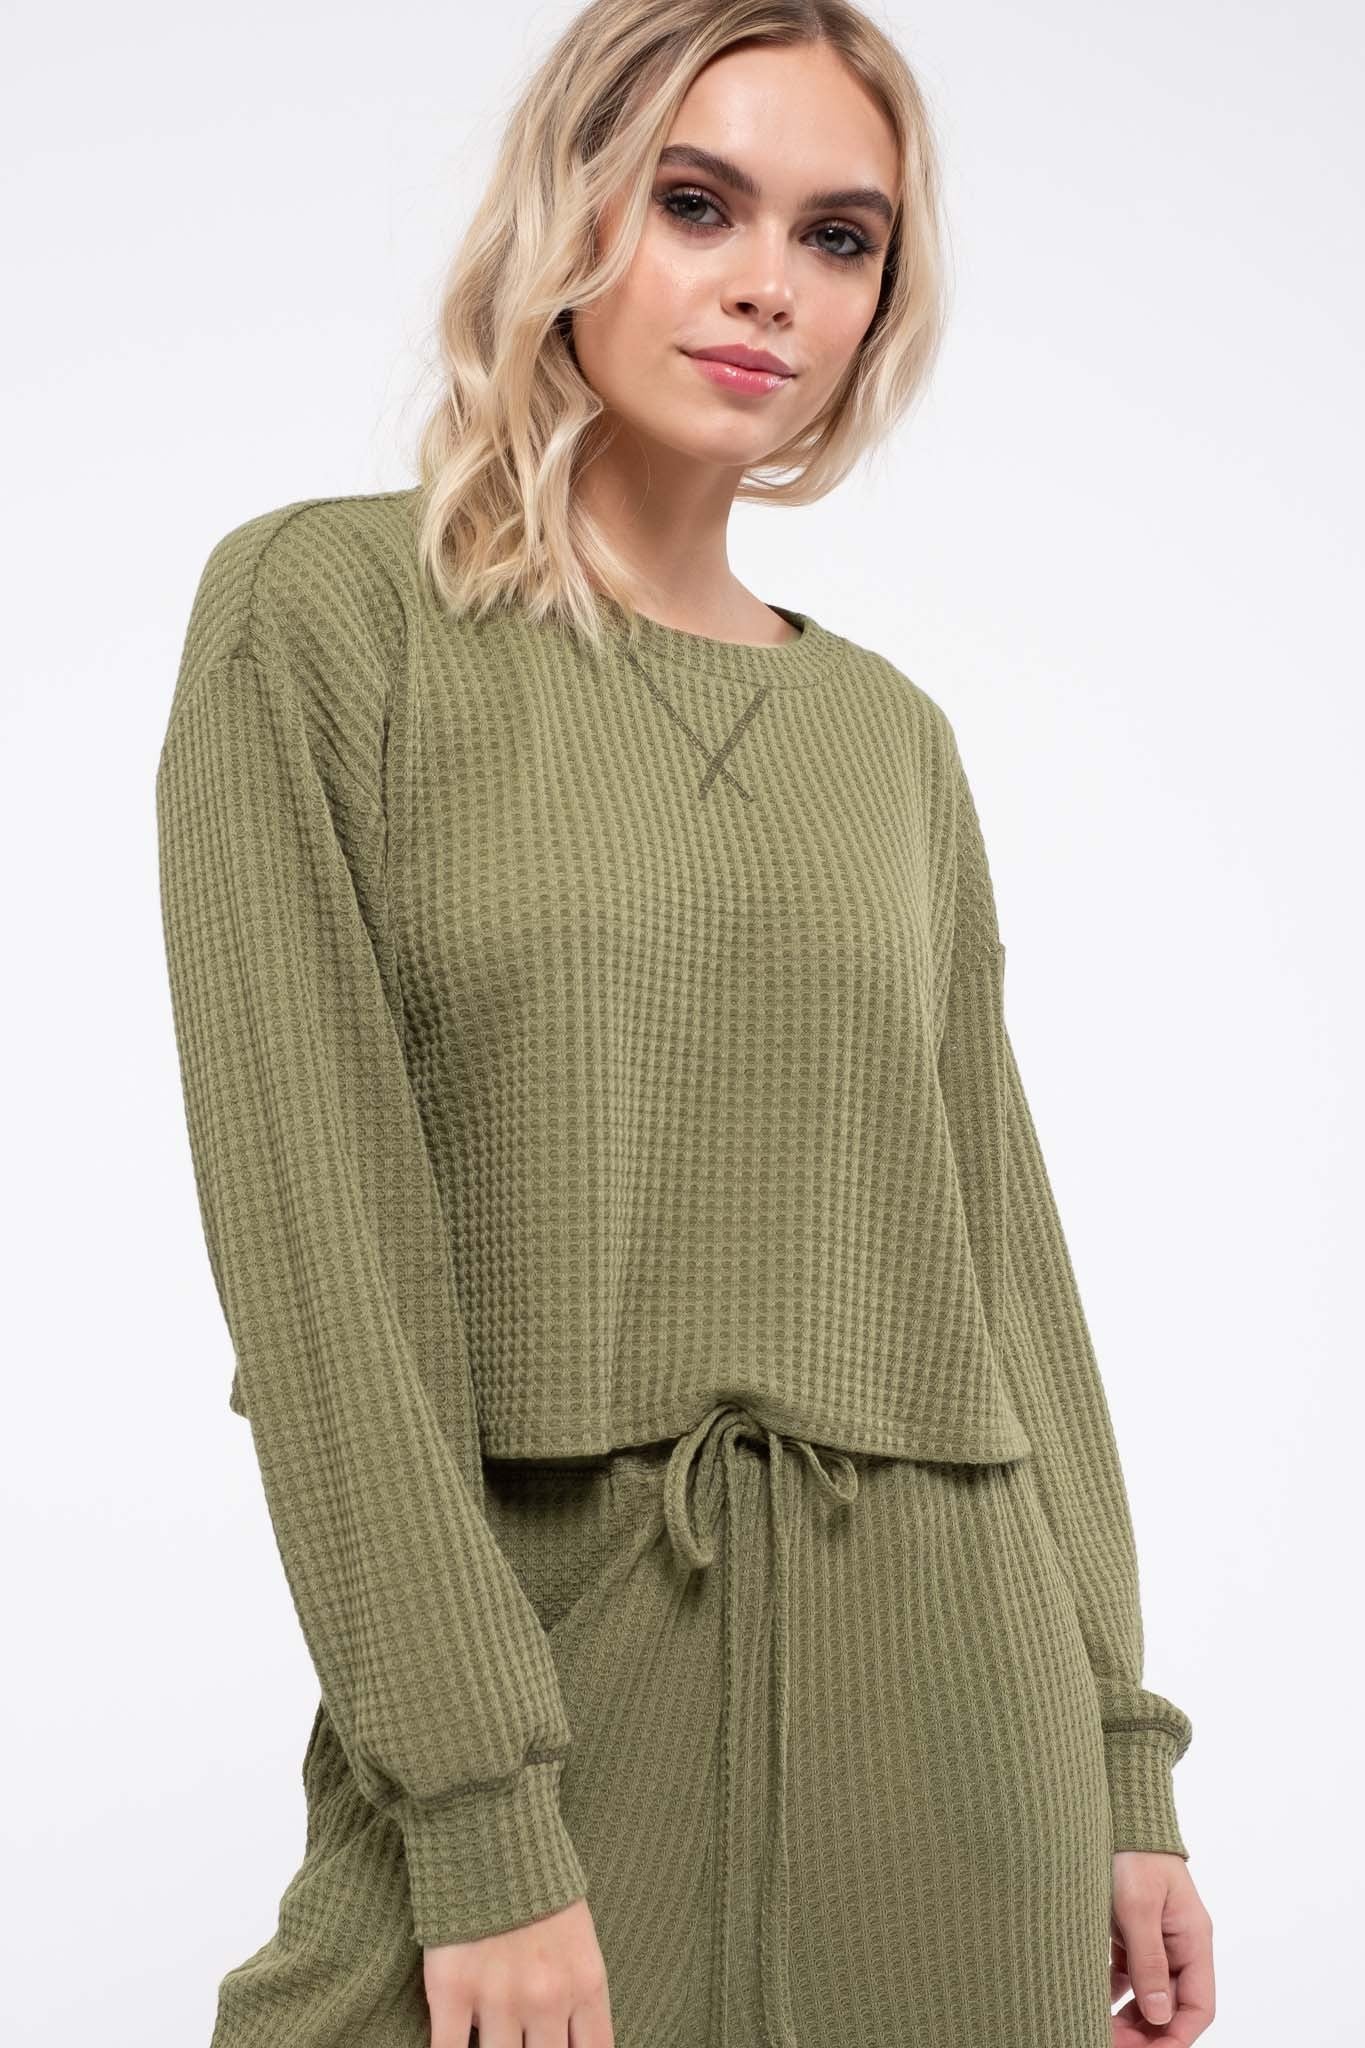 Cozy Waffle Knit Top